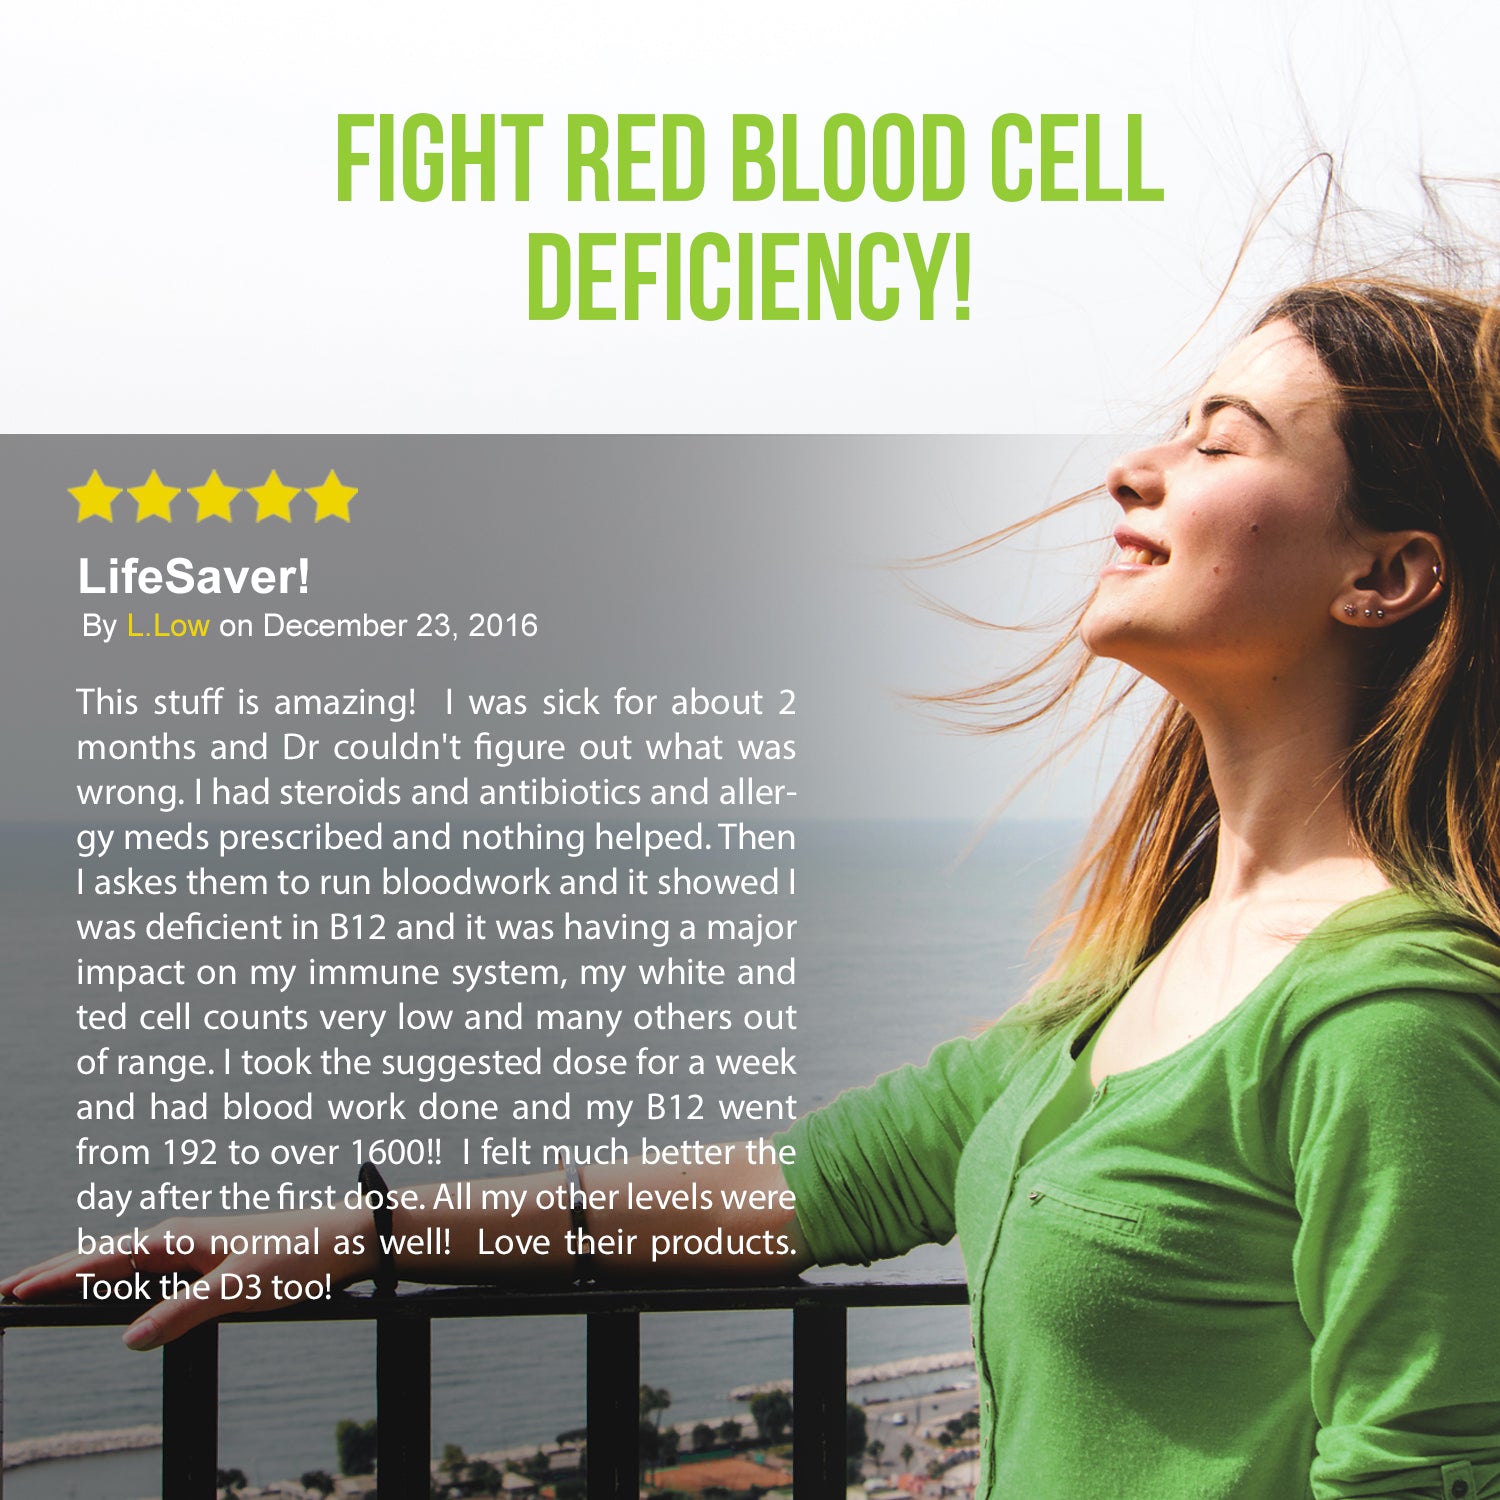 Fight red blood cell deficiency